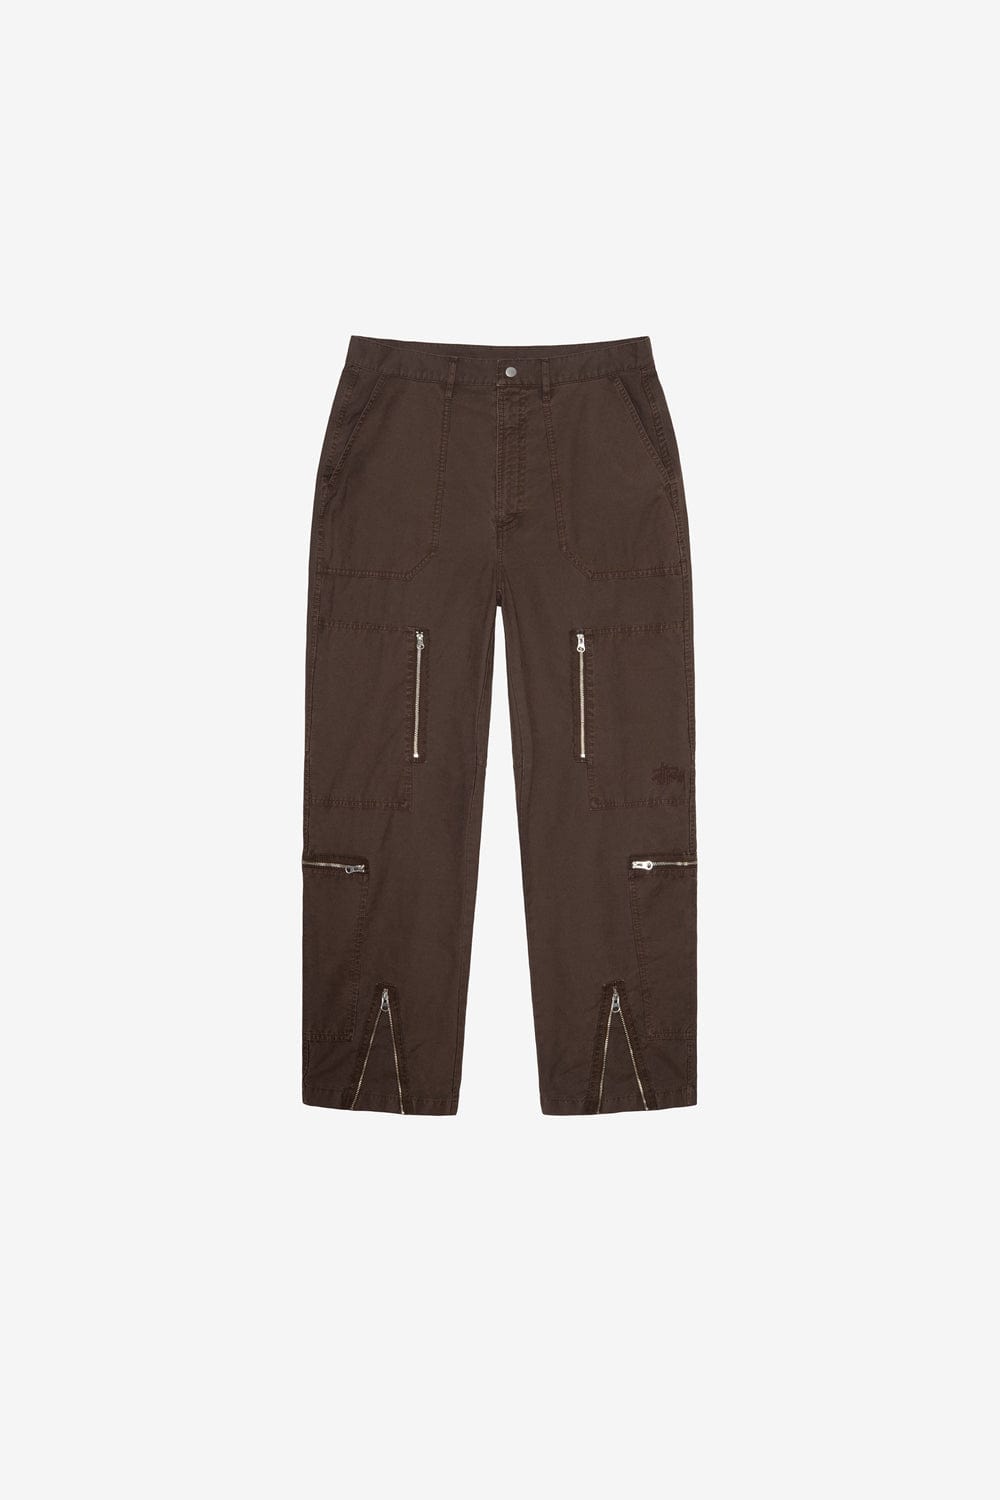 Stussy Flight Pant NyCo Pigment Dyed (Brown)